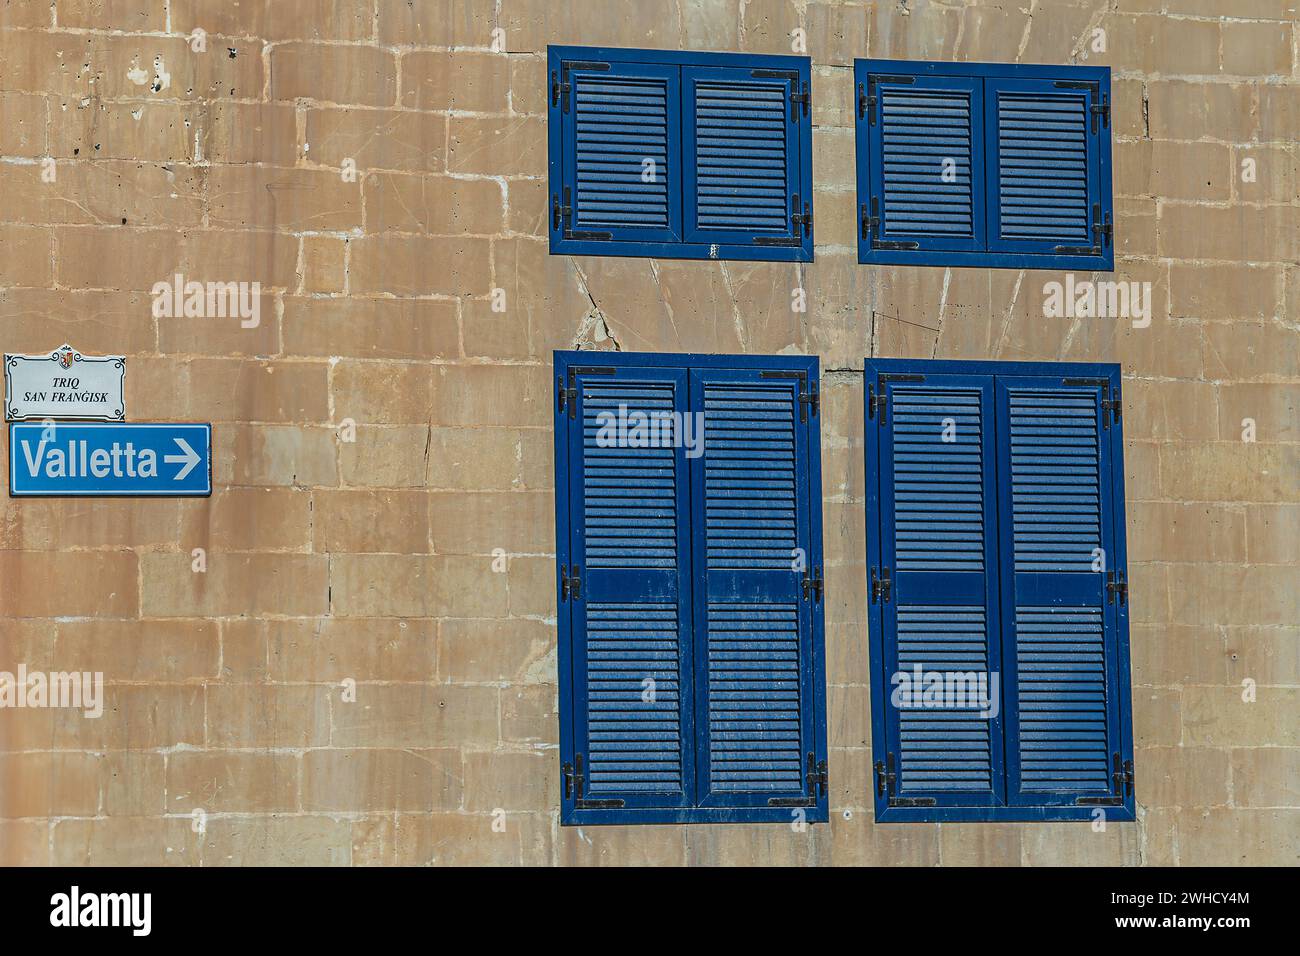 Maltese minimalist architecture. Wall made of locally specific limestone bricks and window shutters traditionally colored in blue. Street signs and di Stock Photo